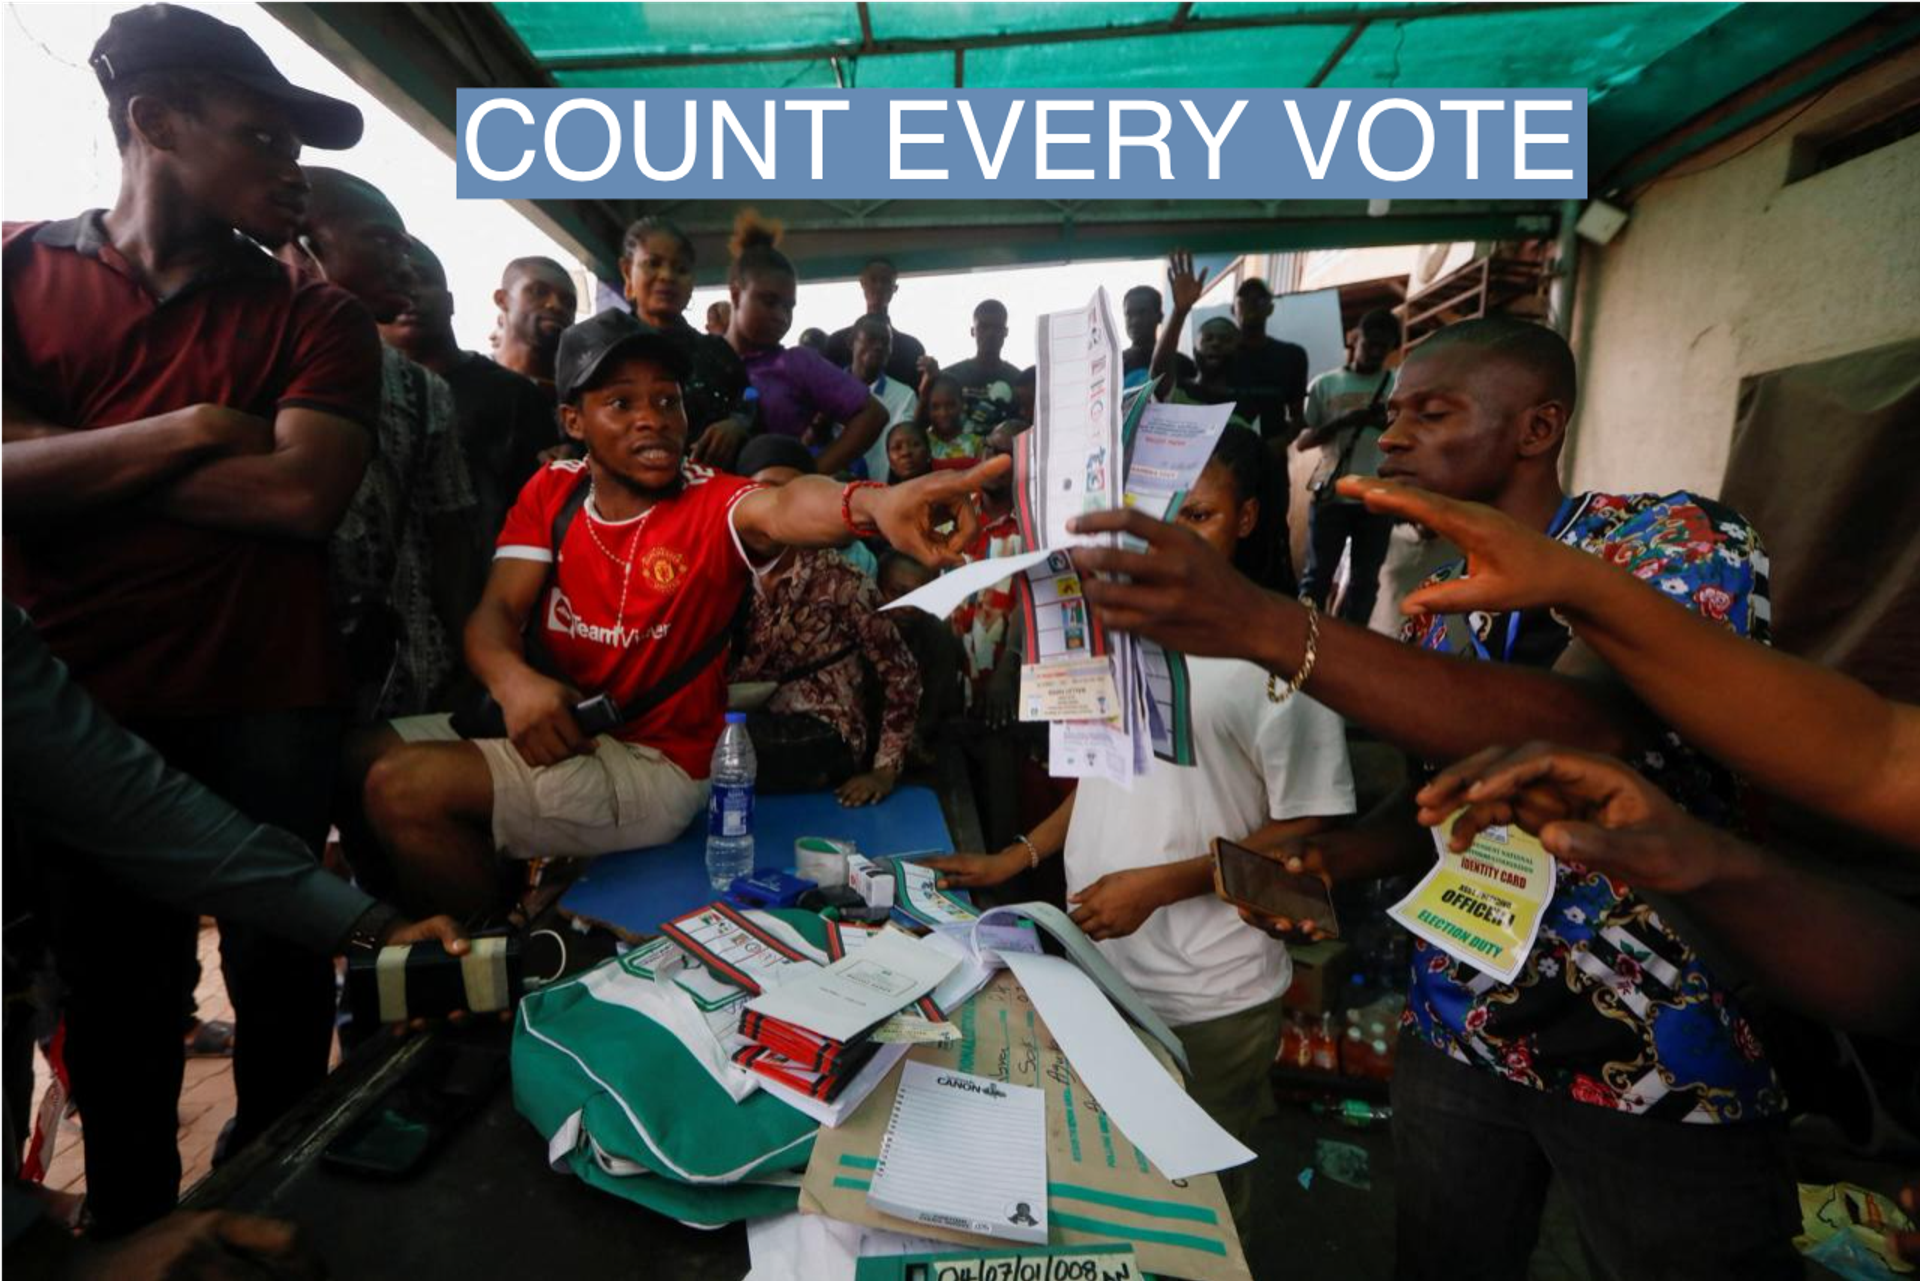 People react during the counting process of Nigeria's presidential election, at a polling unit in Awka, Anambra state, Nigeria February 25, 2023. 